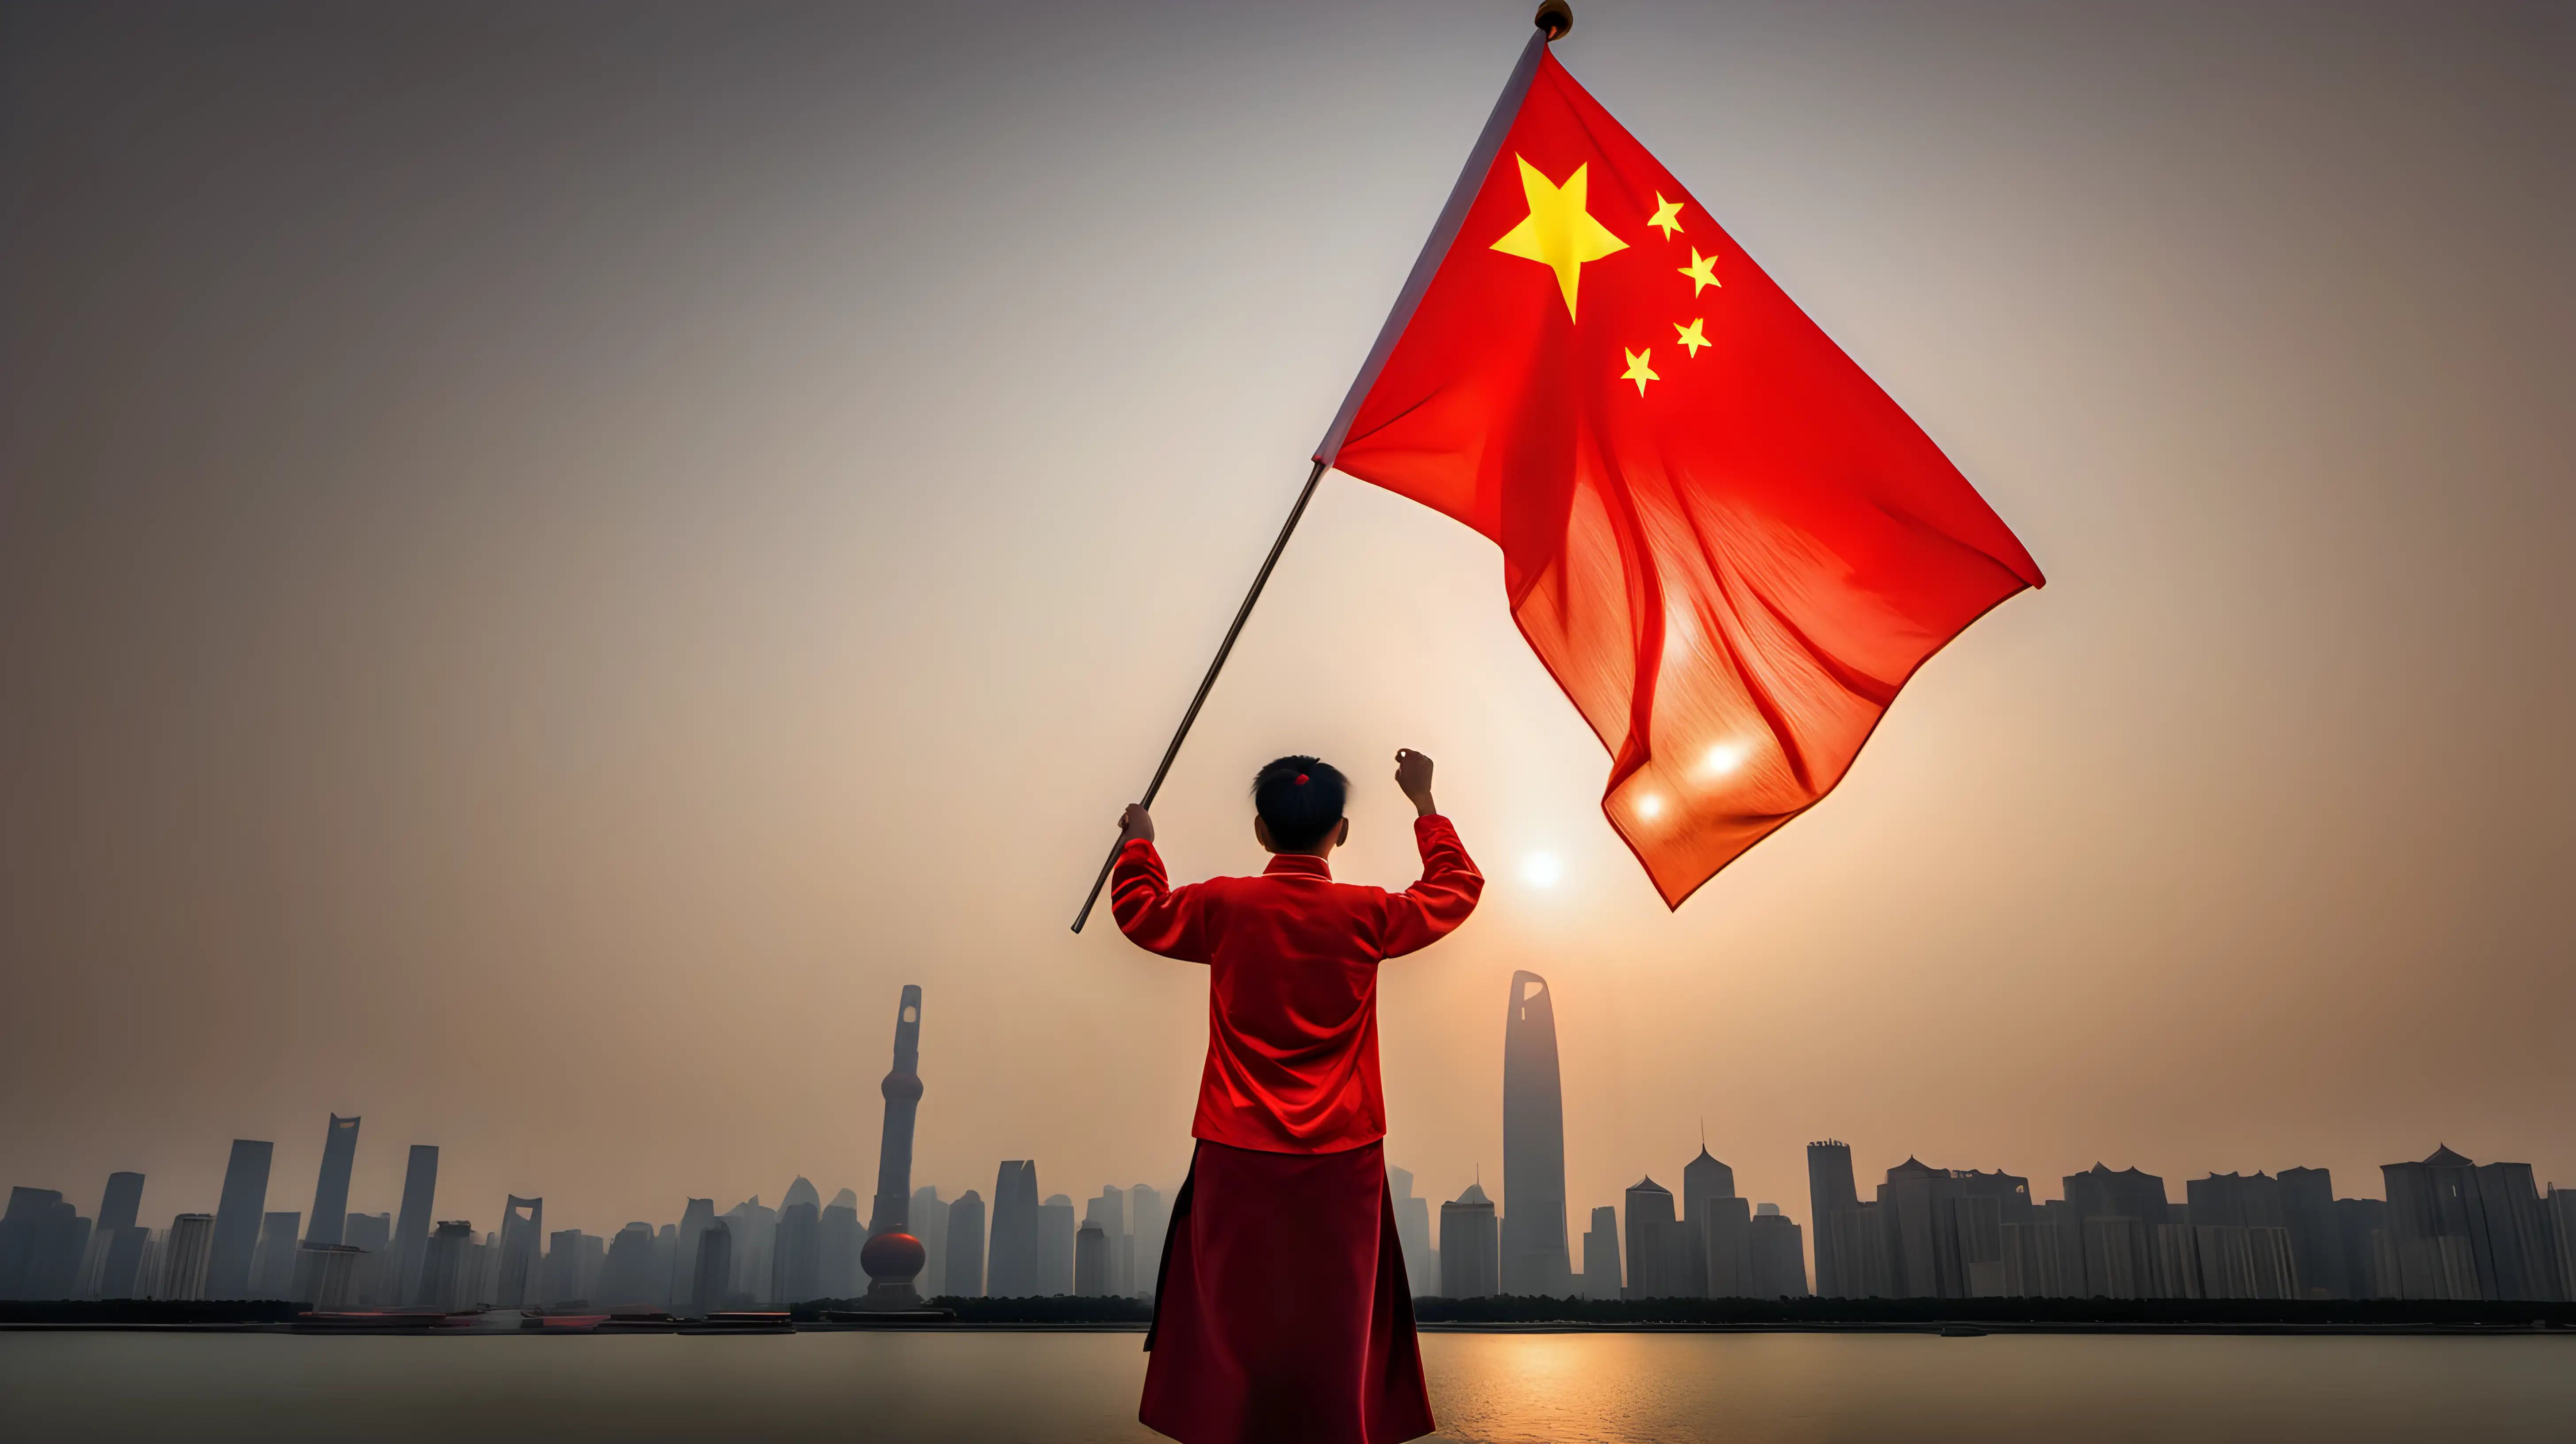 Showcase unwavering devotion to the motherland by capturing a moment of a person holding the glowing Chinese flag with pride and reverence.